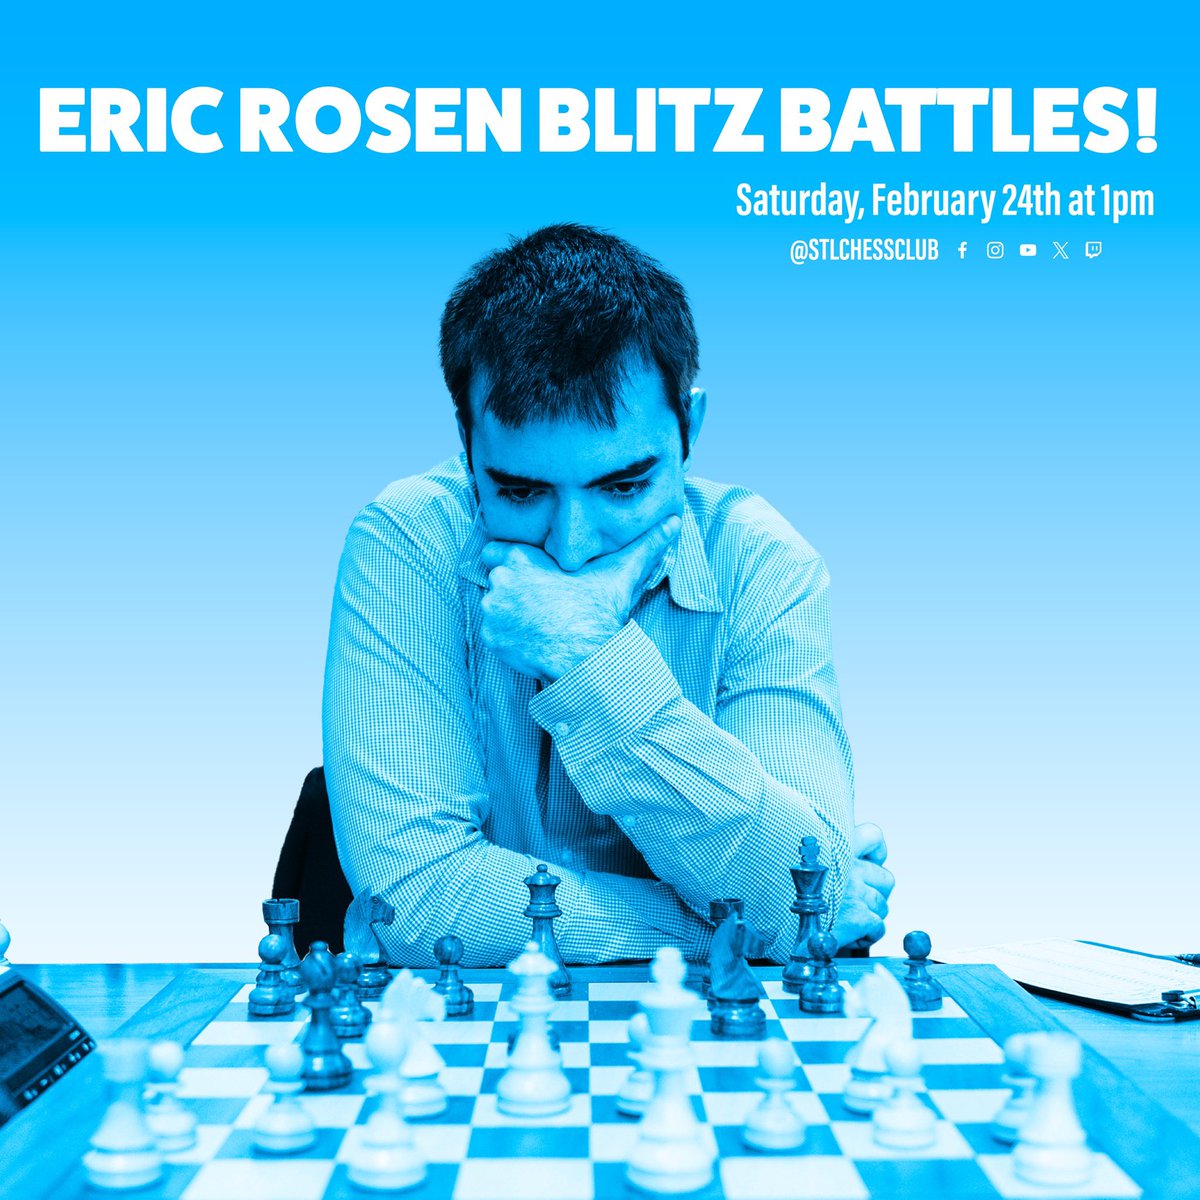 Don’t miss your chance to play world-famous IM Eric Rosen!🤩 On February 24 from 1-4pm, Eric will take on all challengers at the Saint Louis Chess Club in Blitz Battles. 📌Sign up now to reserve your spot on the 24th! 🤗All games will be recorded and could be posted online to the…